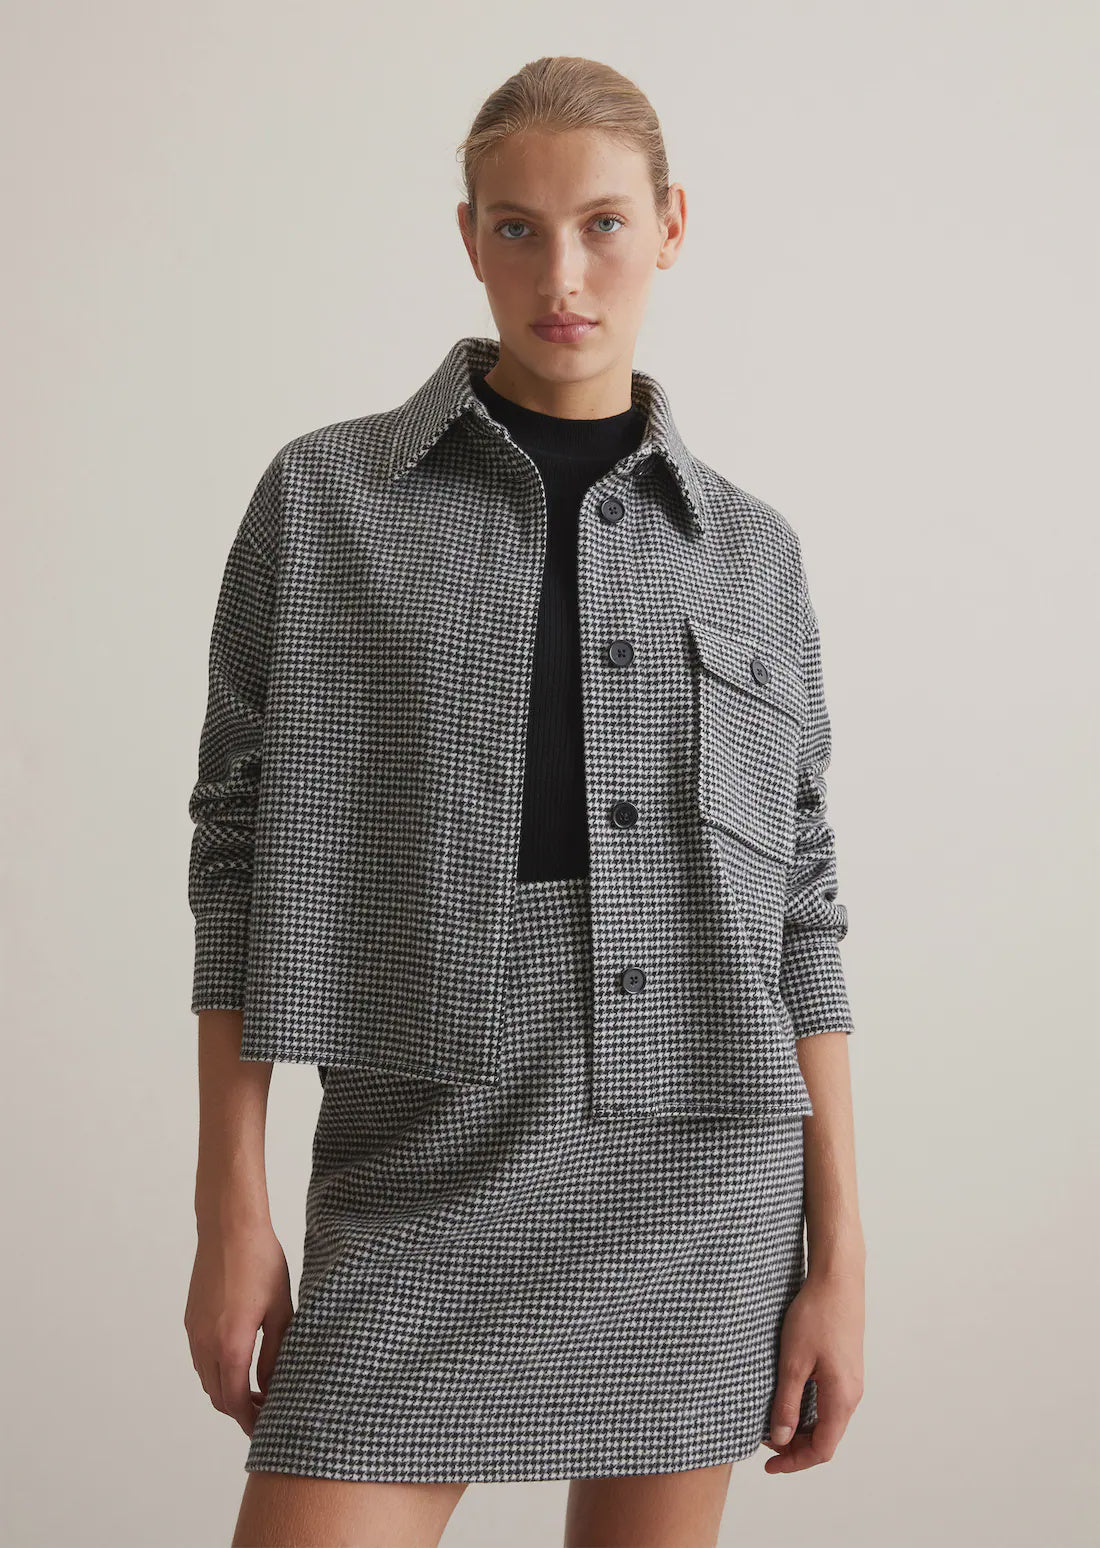 Boxy shape over shirt in casual houndstooth